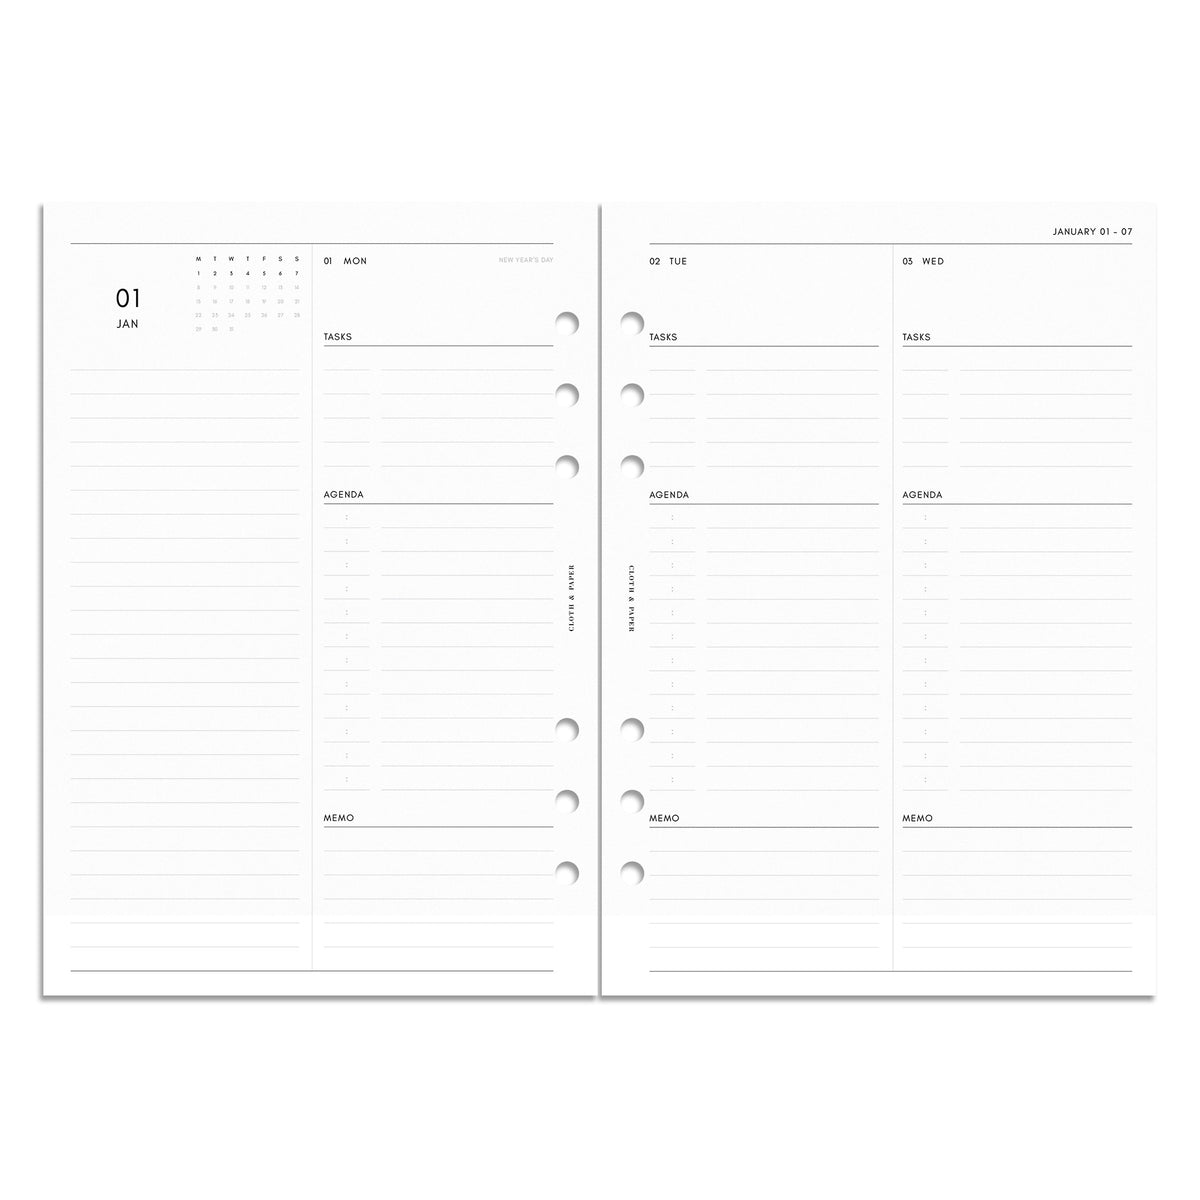 A4, A5, A6 hole punched white lined paper for ring binder mockup